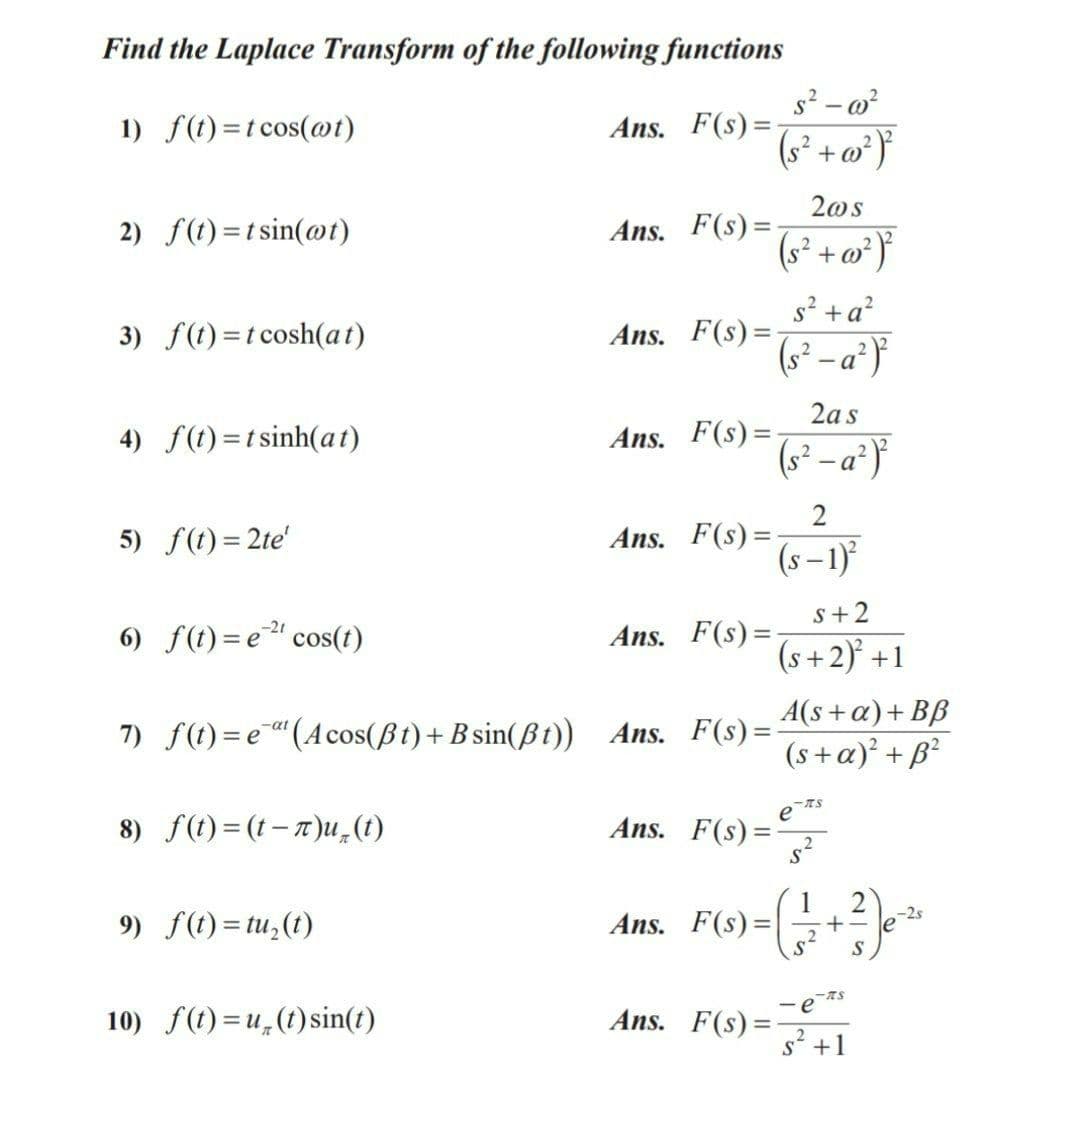 Find the Laplace Transform of the following functions
s? - o?
1) f(t)=t cos(@t)
Ans. F(s)=
(s² + w* }
20s
2) f(t) =t sin(@t)
Ans. F(s)=
(s² + w° }
s? +a?
3) f(t) =t cosh(at)
Ans. F(s) =
(s² – a*}
2as
Ans. F(s) =
(s² – a²)}
4) f(t) =tsinh(at)
2
Ans. F(s) =
(s–1)
5) f(t)= 2te'
s+2
6) f(t) =e" cos(1)
Ans. F(s)=-
(s+2) +1
7) f(t)=e"(Acos(ßt)+ B sin(ßt)) Ans. F(s)=-
A(s+a)+Bß
(s +a)² + ß²
-at
Ans. F(s)=
e
8) f(t)=(t – x)u¸(t)
-2s
9) f(t) = tu,(t)
Ans. F(s)=
2
S
ets
10) f(t) =u,(t)sin(t)
Ans. F(s) =
s? +1
